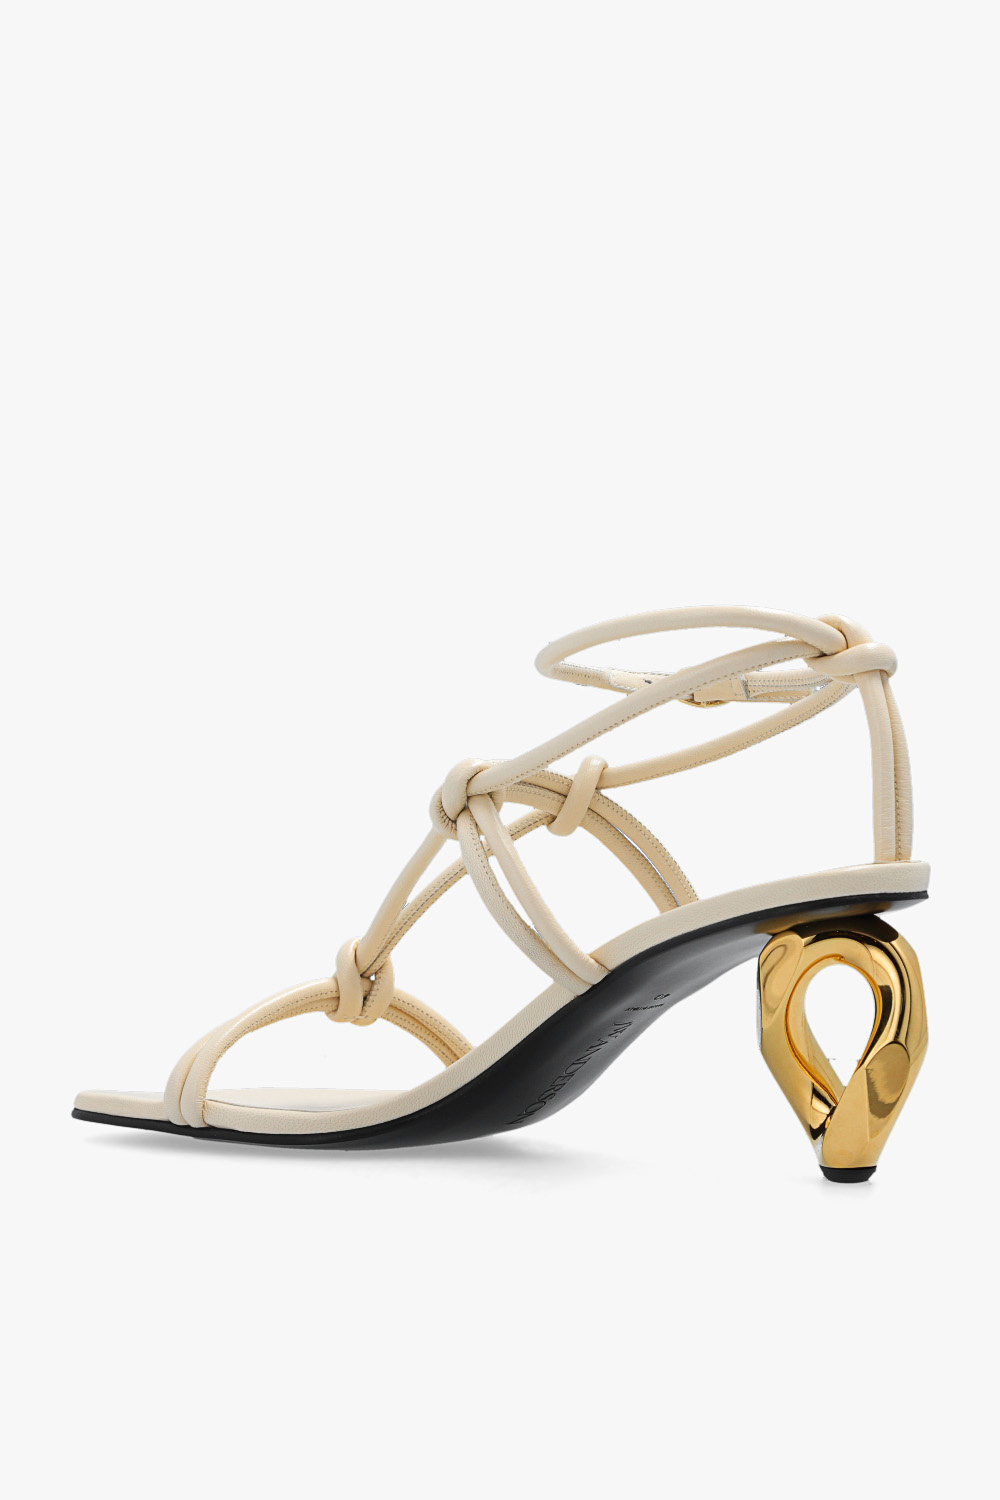 JW Anderson ‘Catena’ heeled sandals